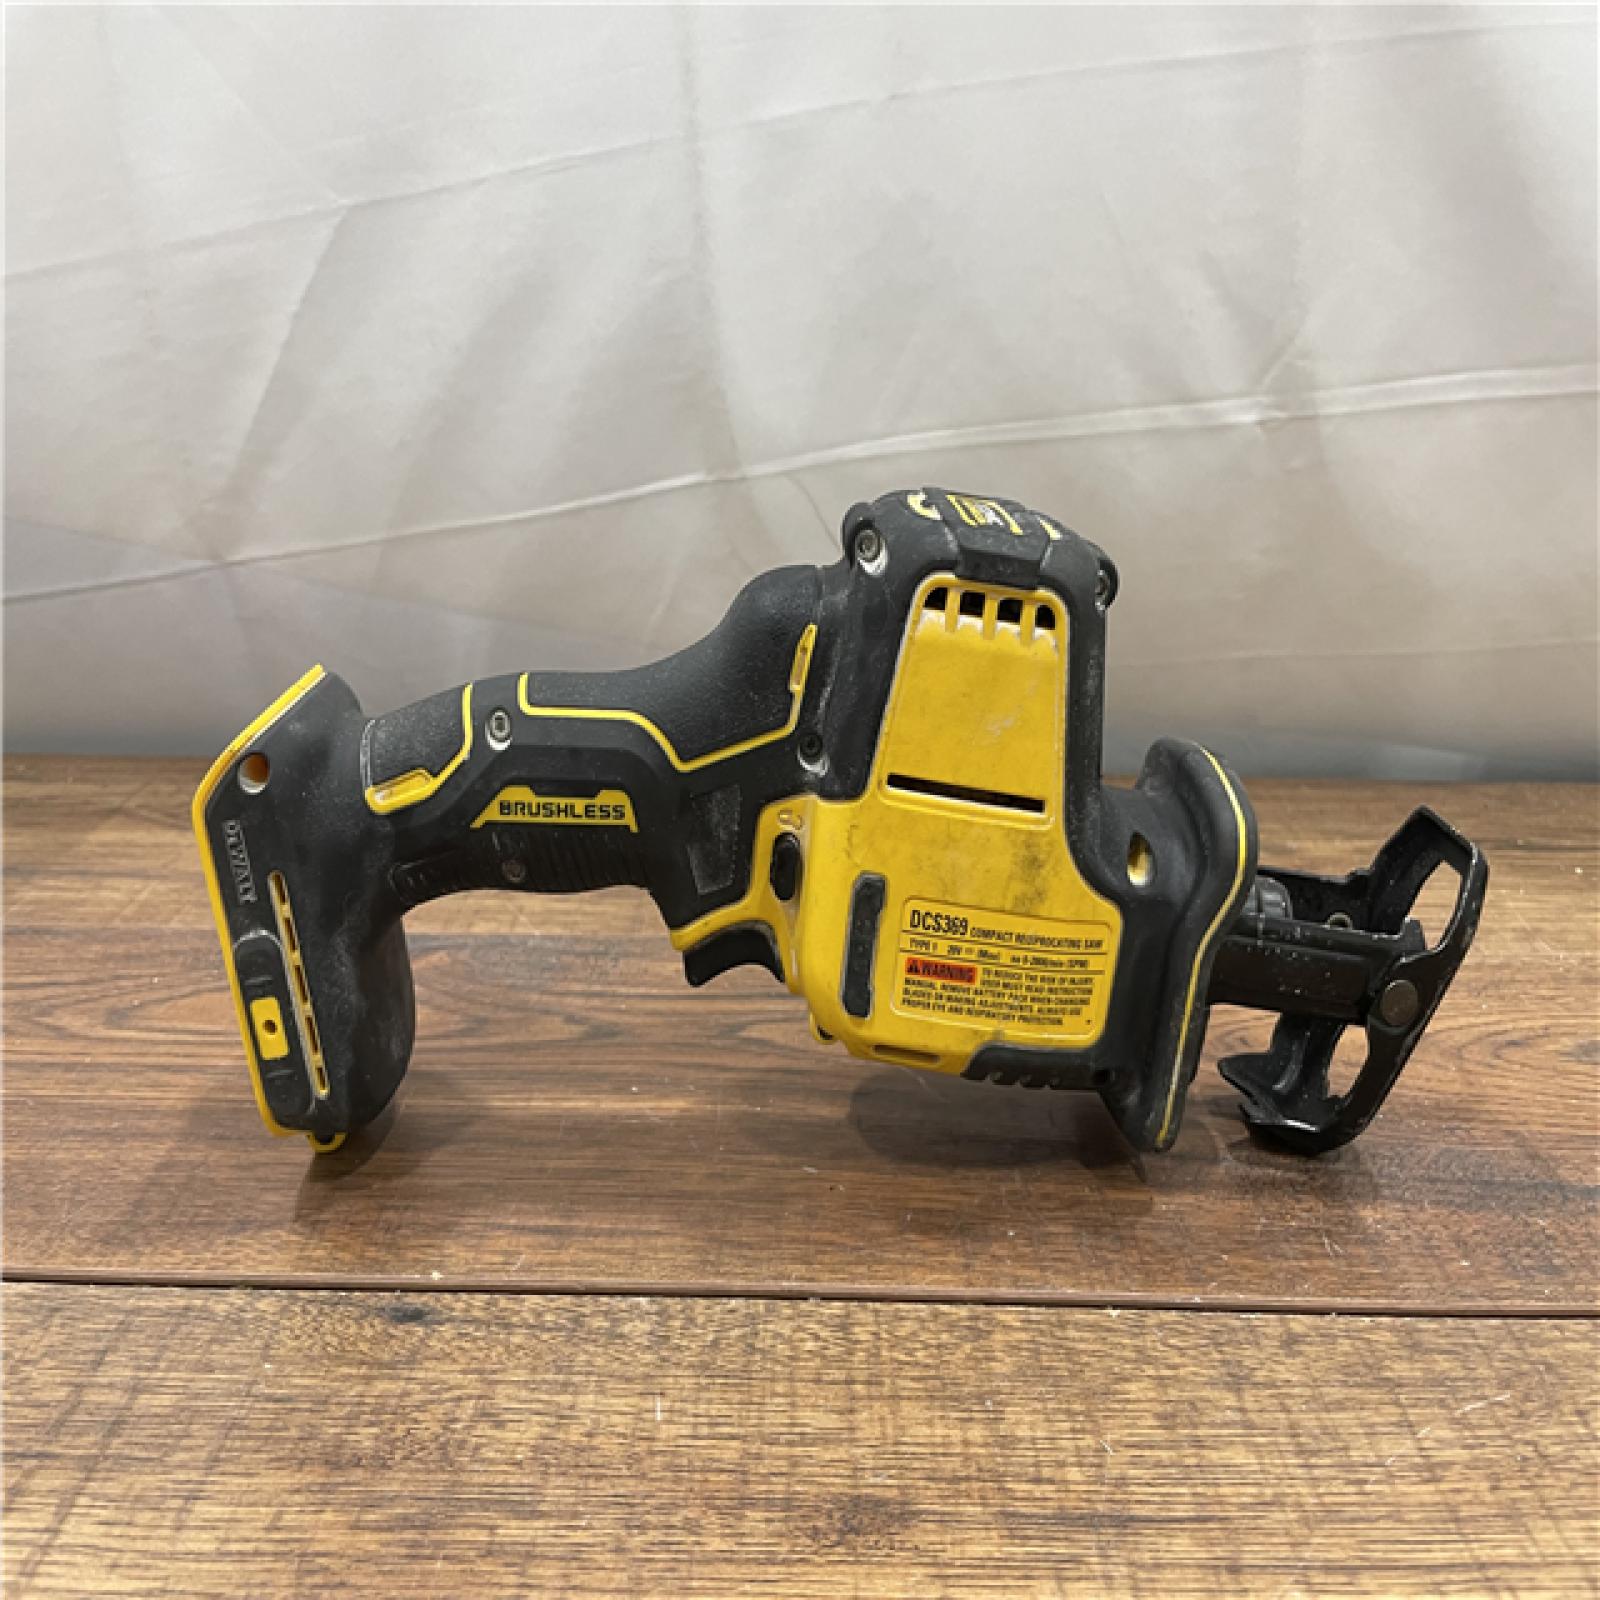 AS-IS DEWALT Cordless Brushless Compact Reciprocating Saw (Tool-Only)